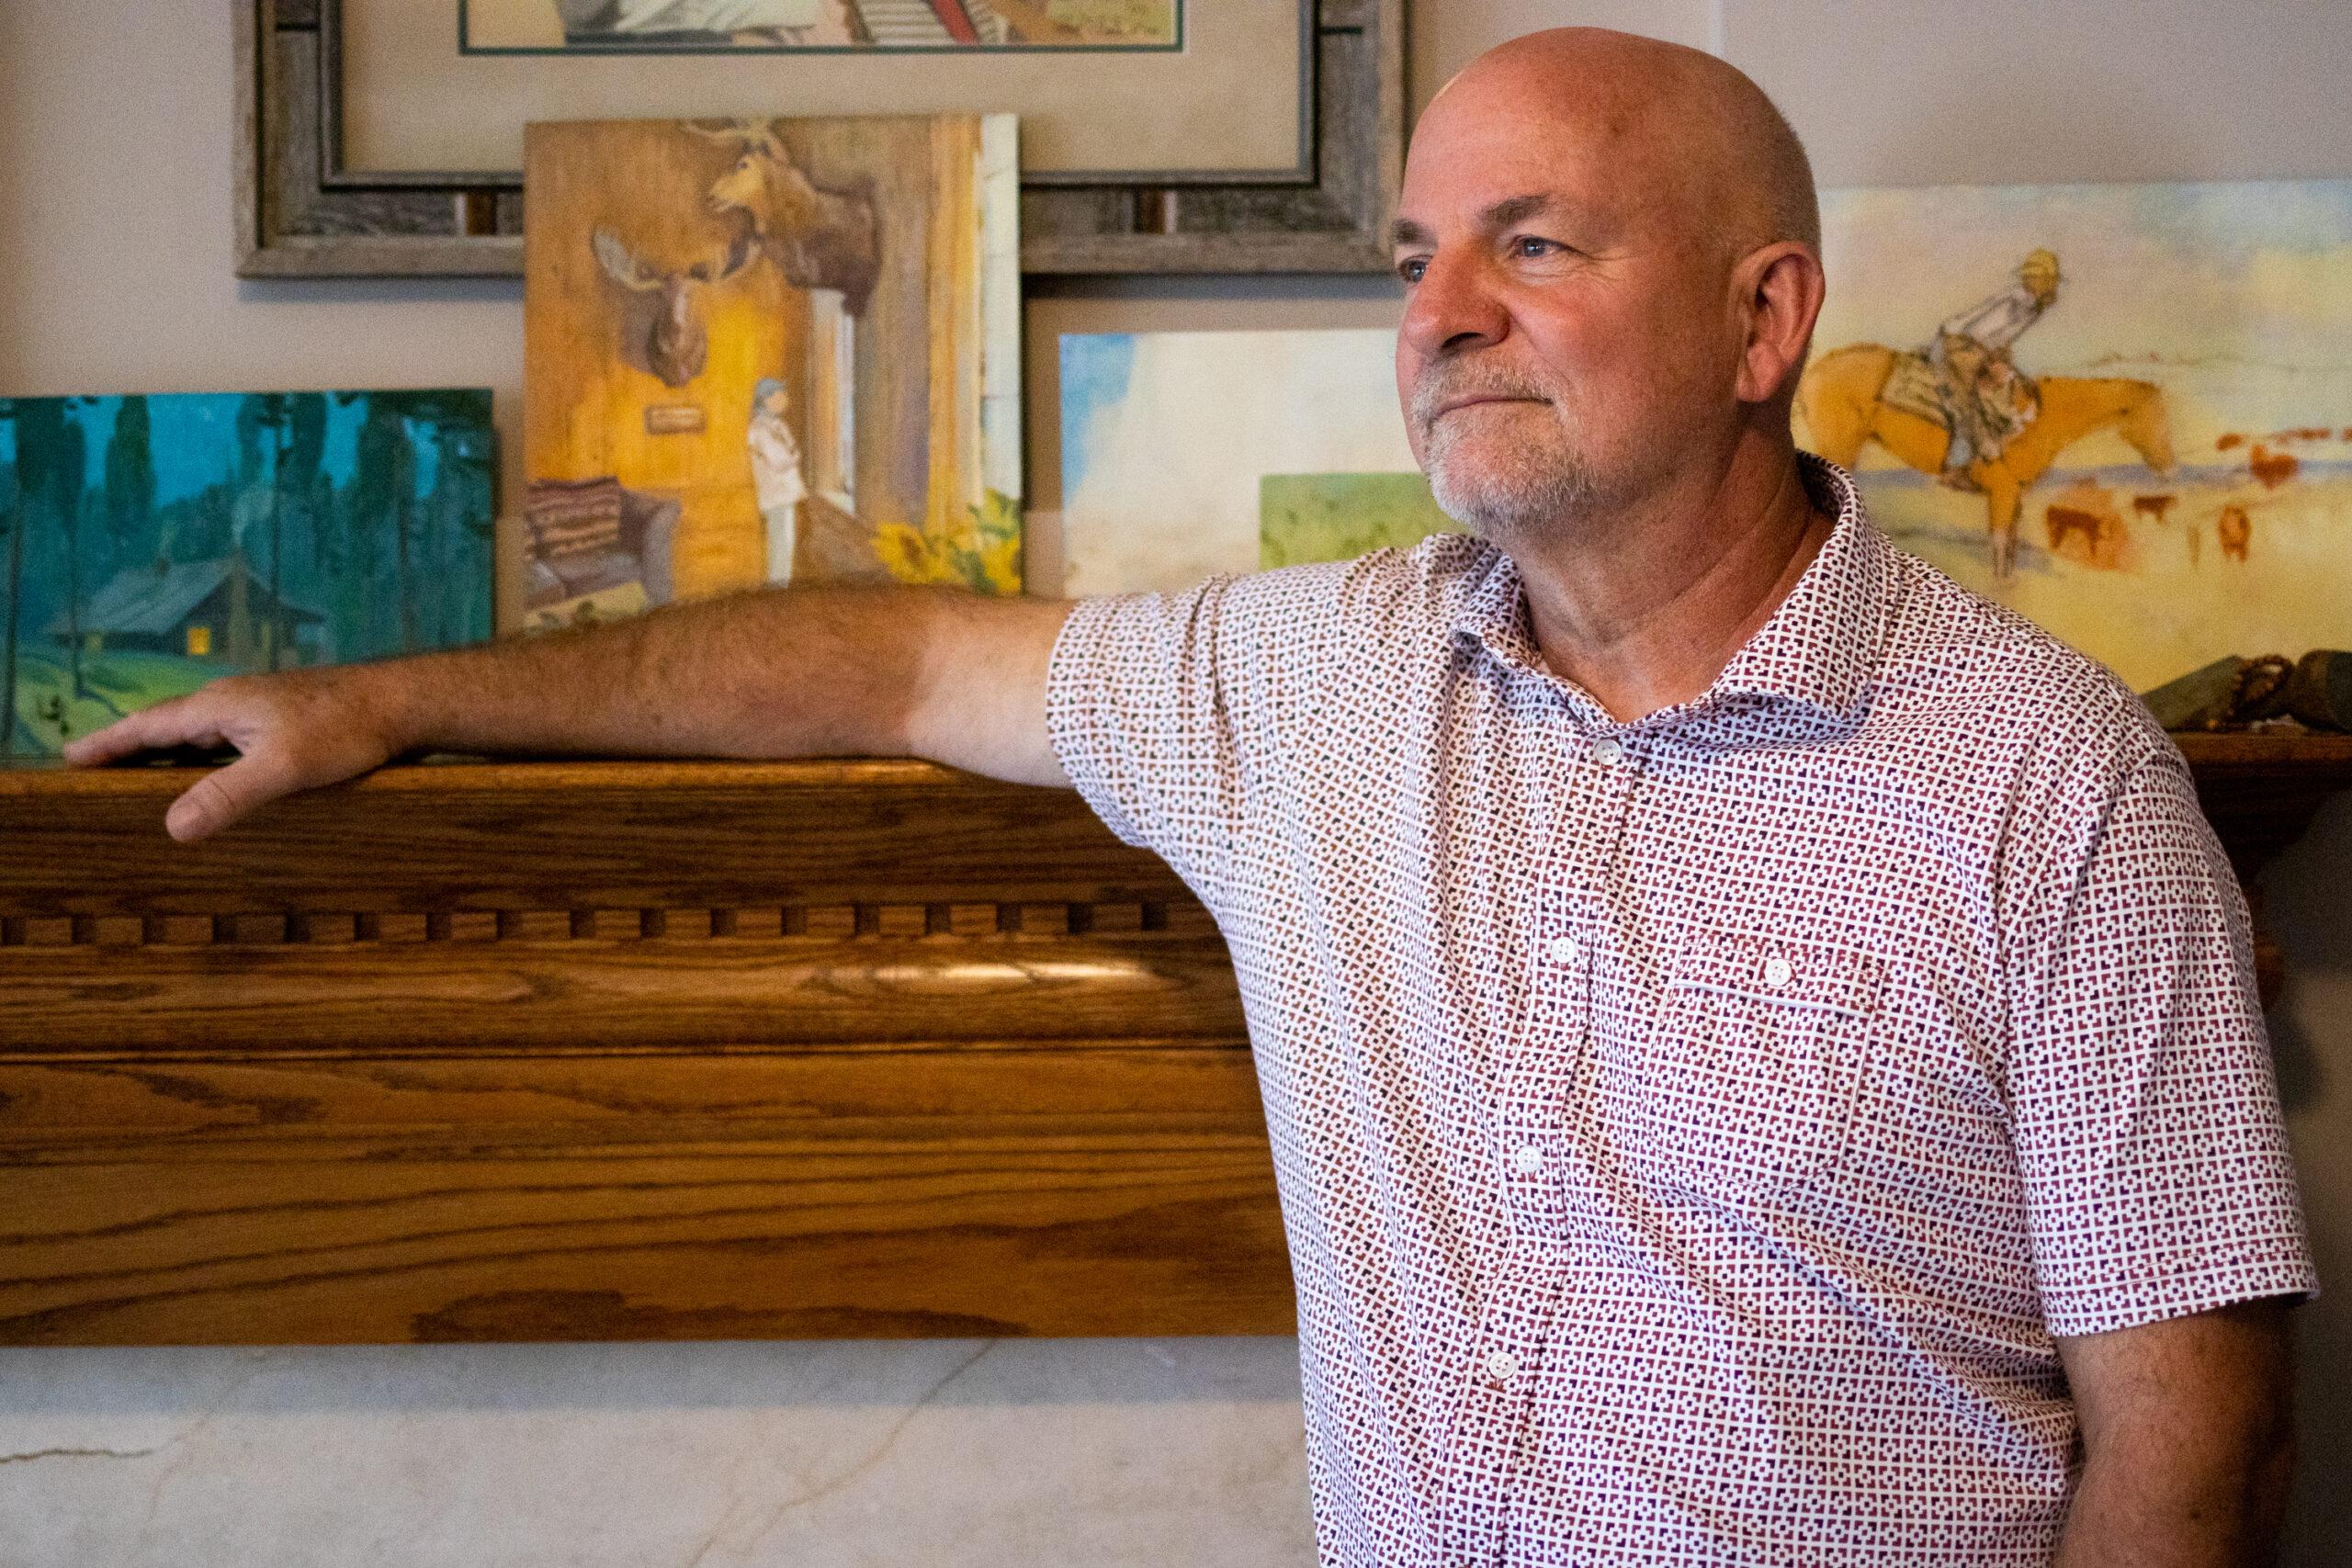 A white man in his 60s stands casually with one arm draped over the top of a fireplace mantle. On the mantle, a number of his oil paintings depicting scenes of the American West are informally displayed.